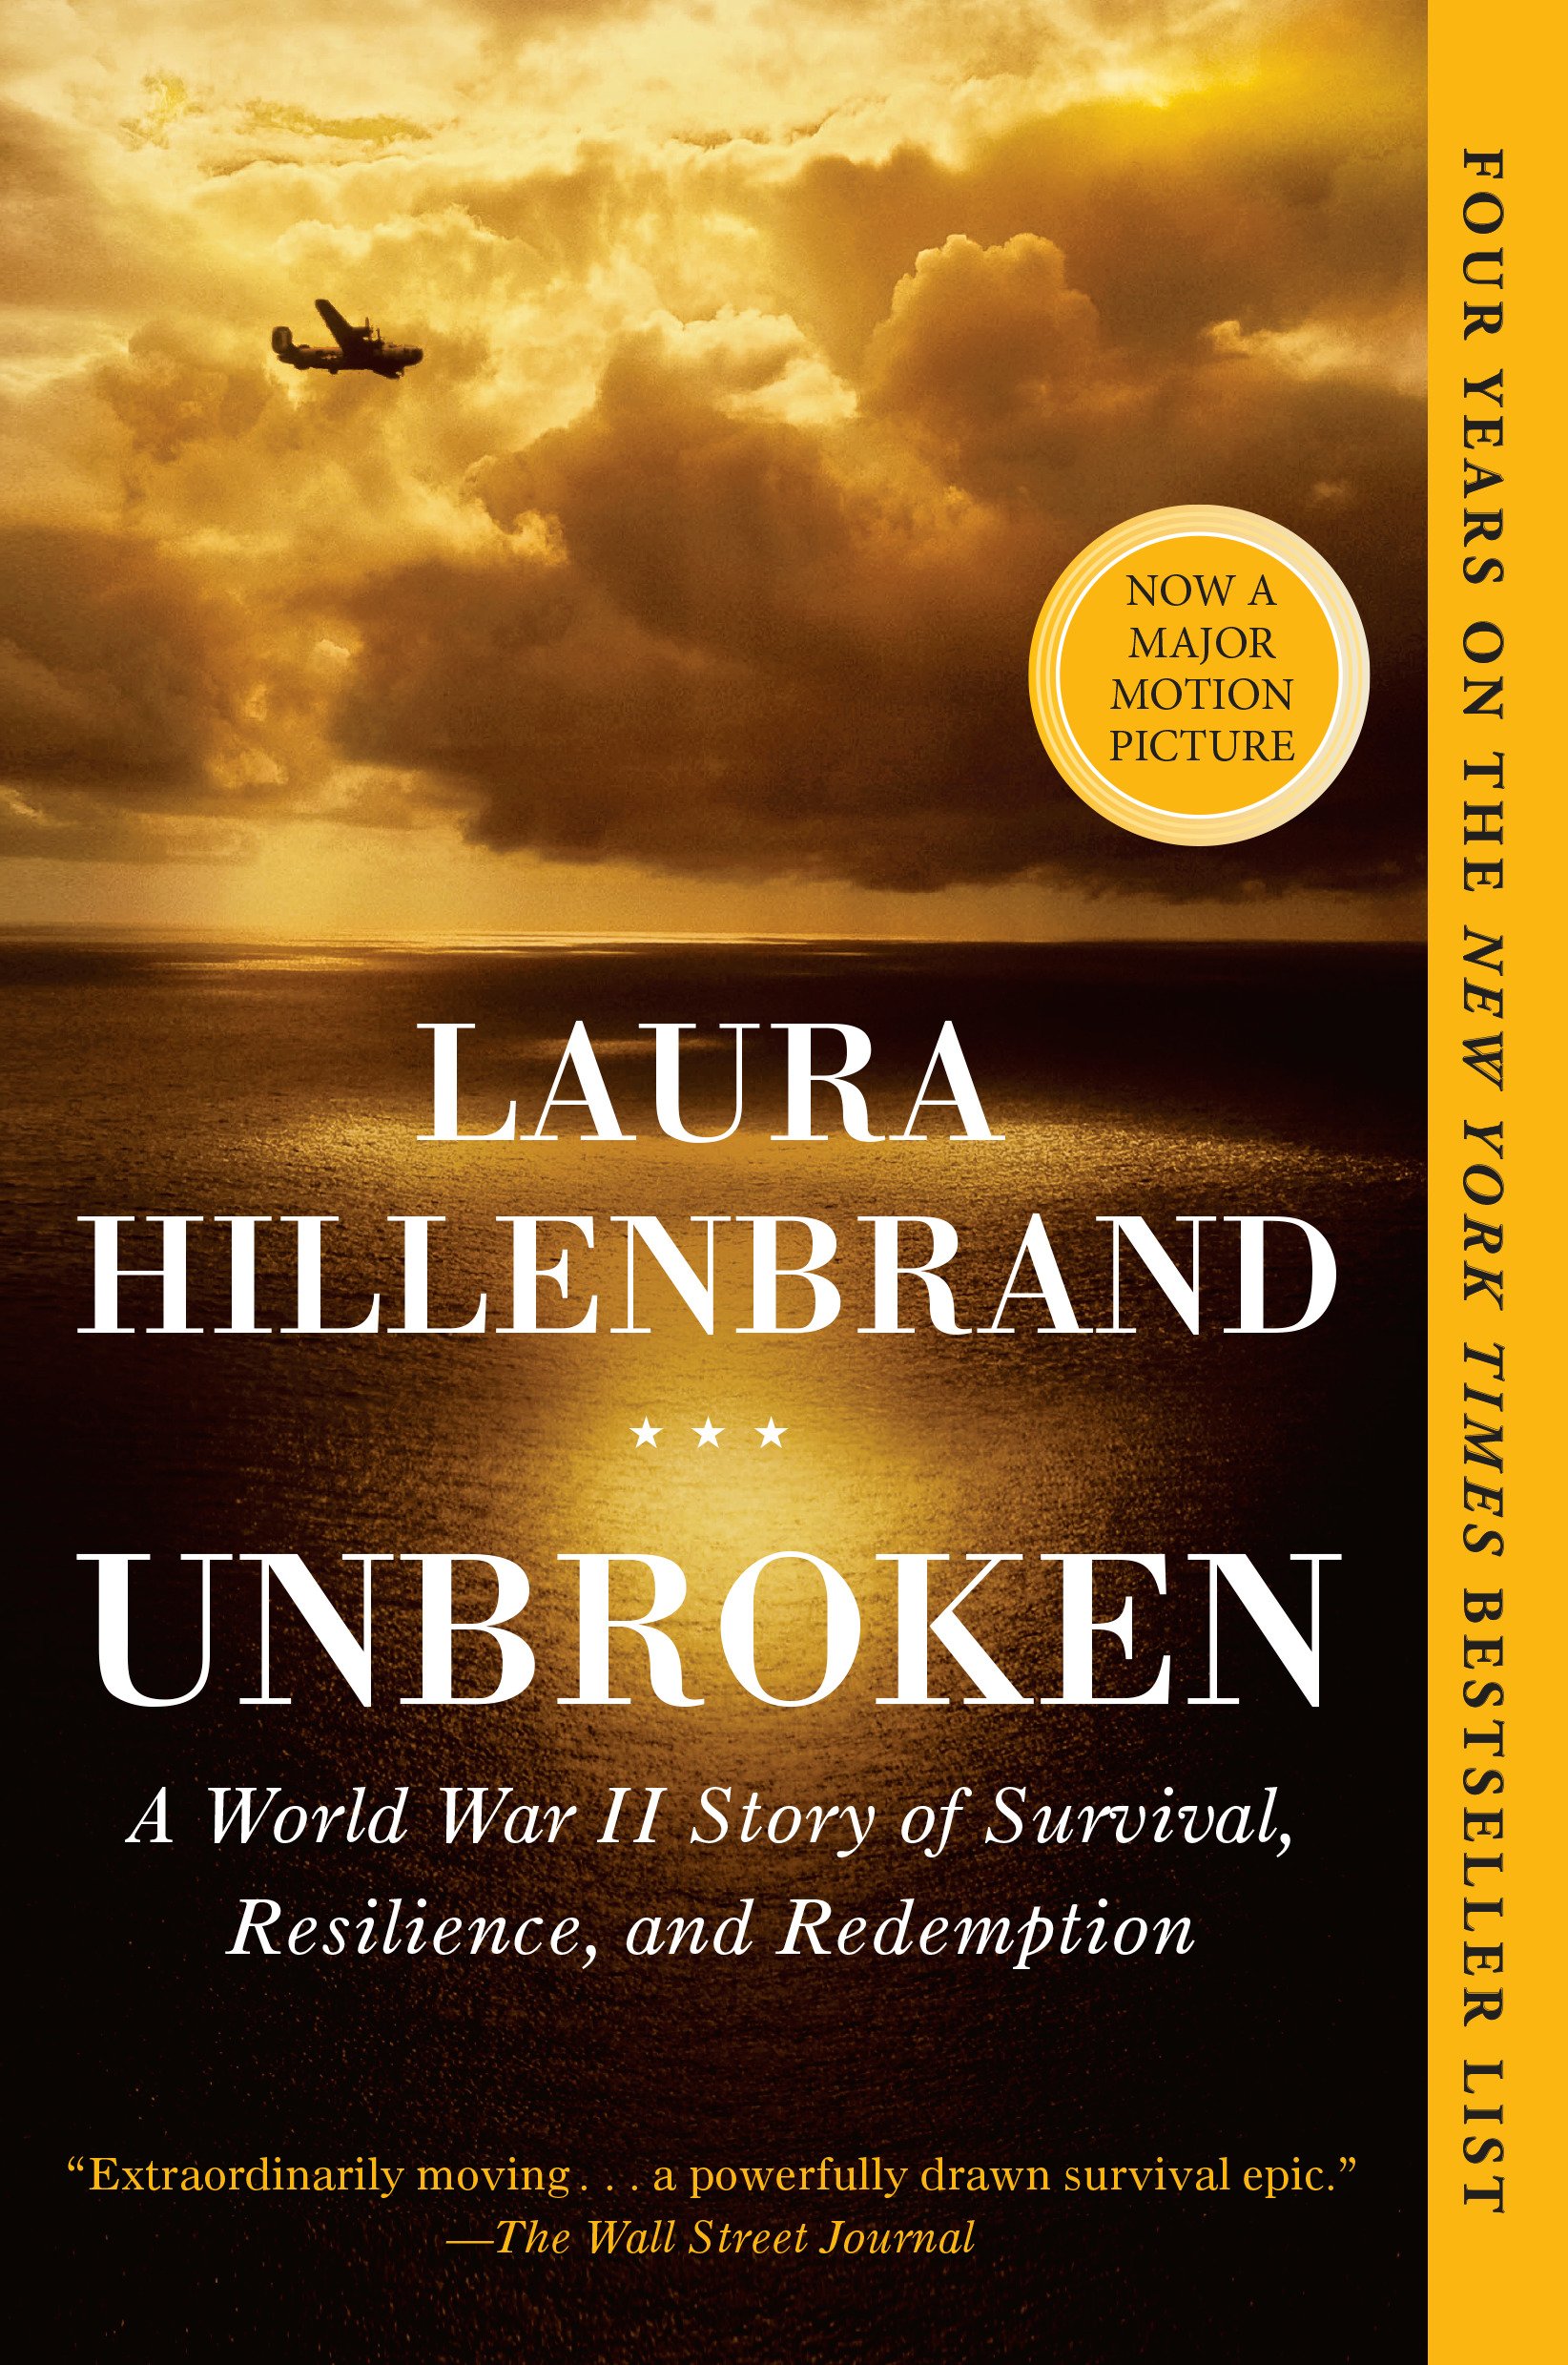 10. 'Unbroken: A World War II Story of Survival, Resilience, and Redemption' by Laura Hillenbrand